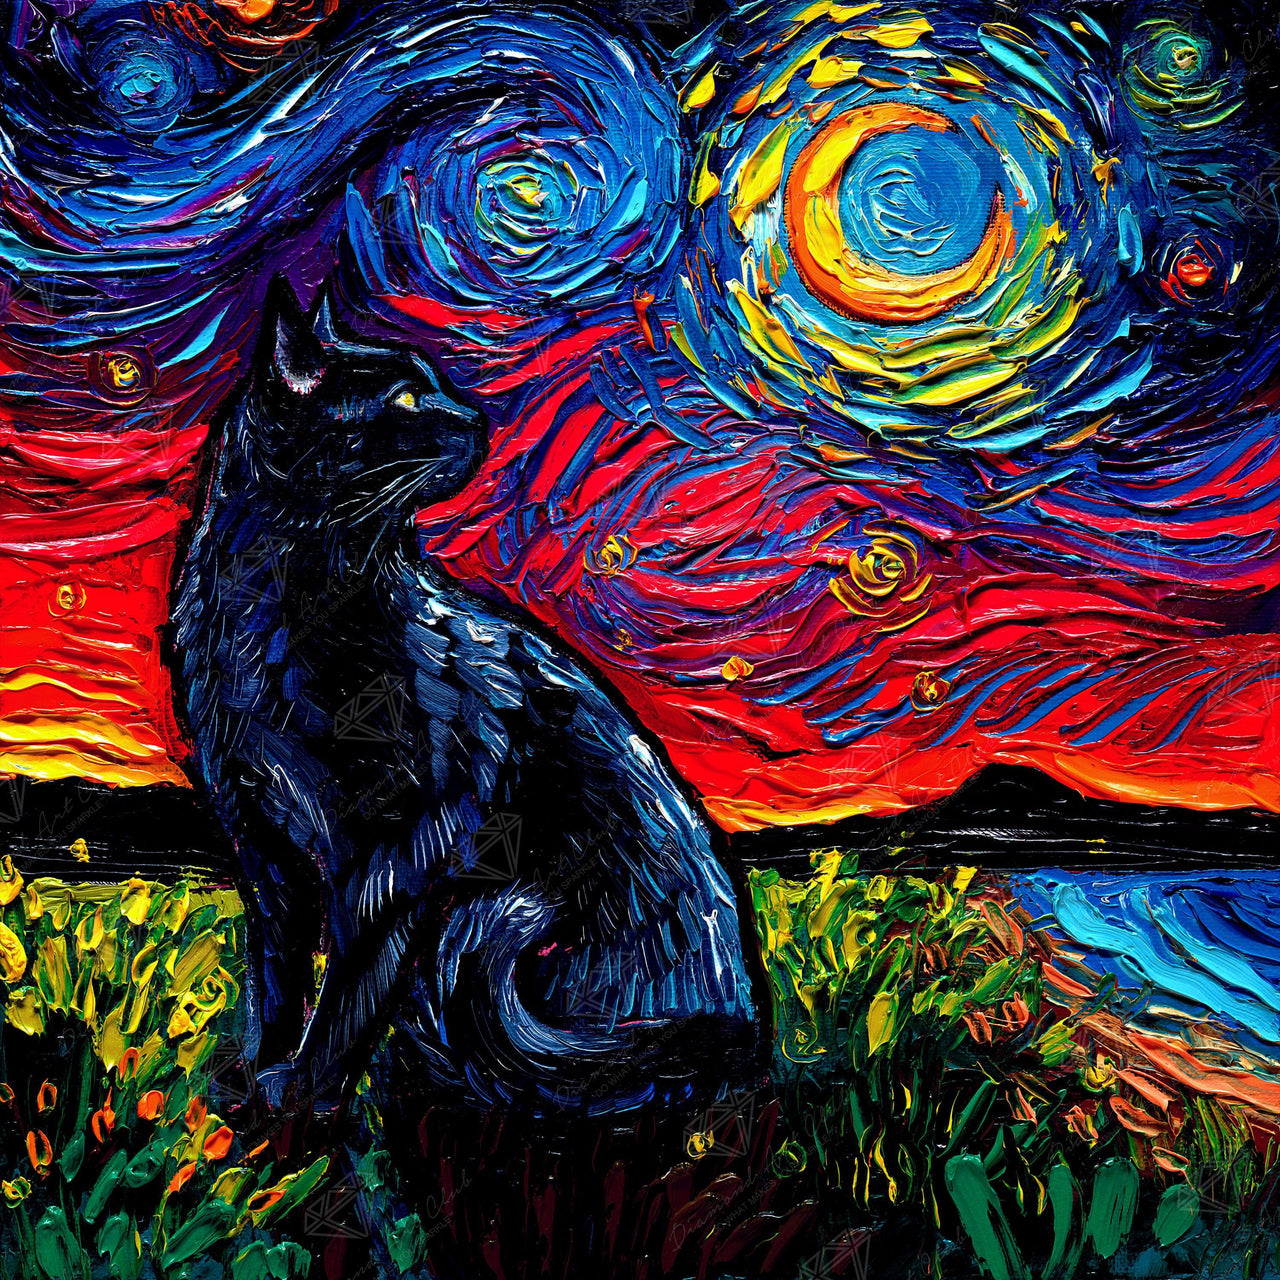 Diamond Painting Black Cat Night 2 25.6" x 25.6" (65cm x 65cm) / Square with 42 Colors including 4 ABs / 68,121